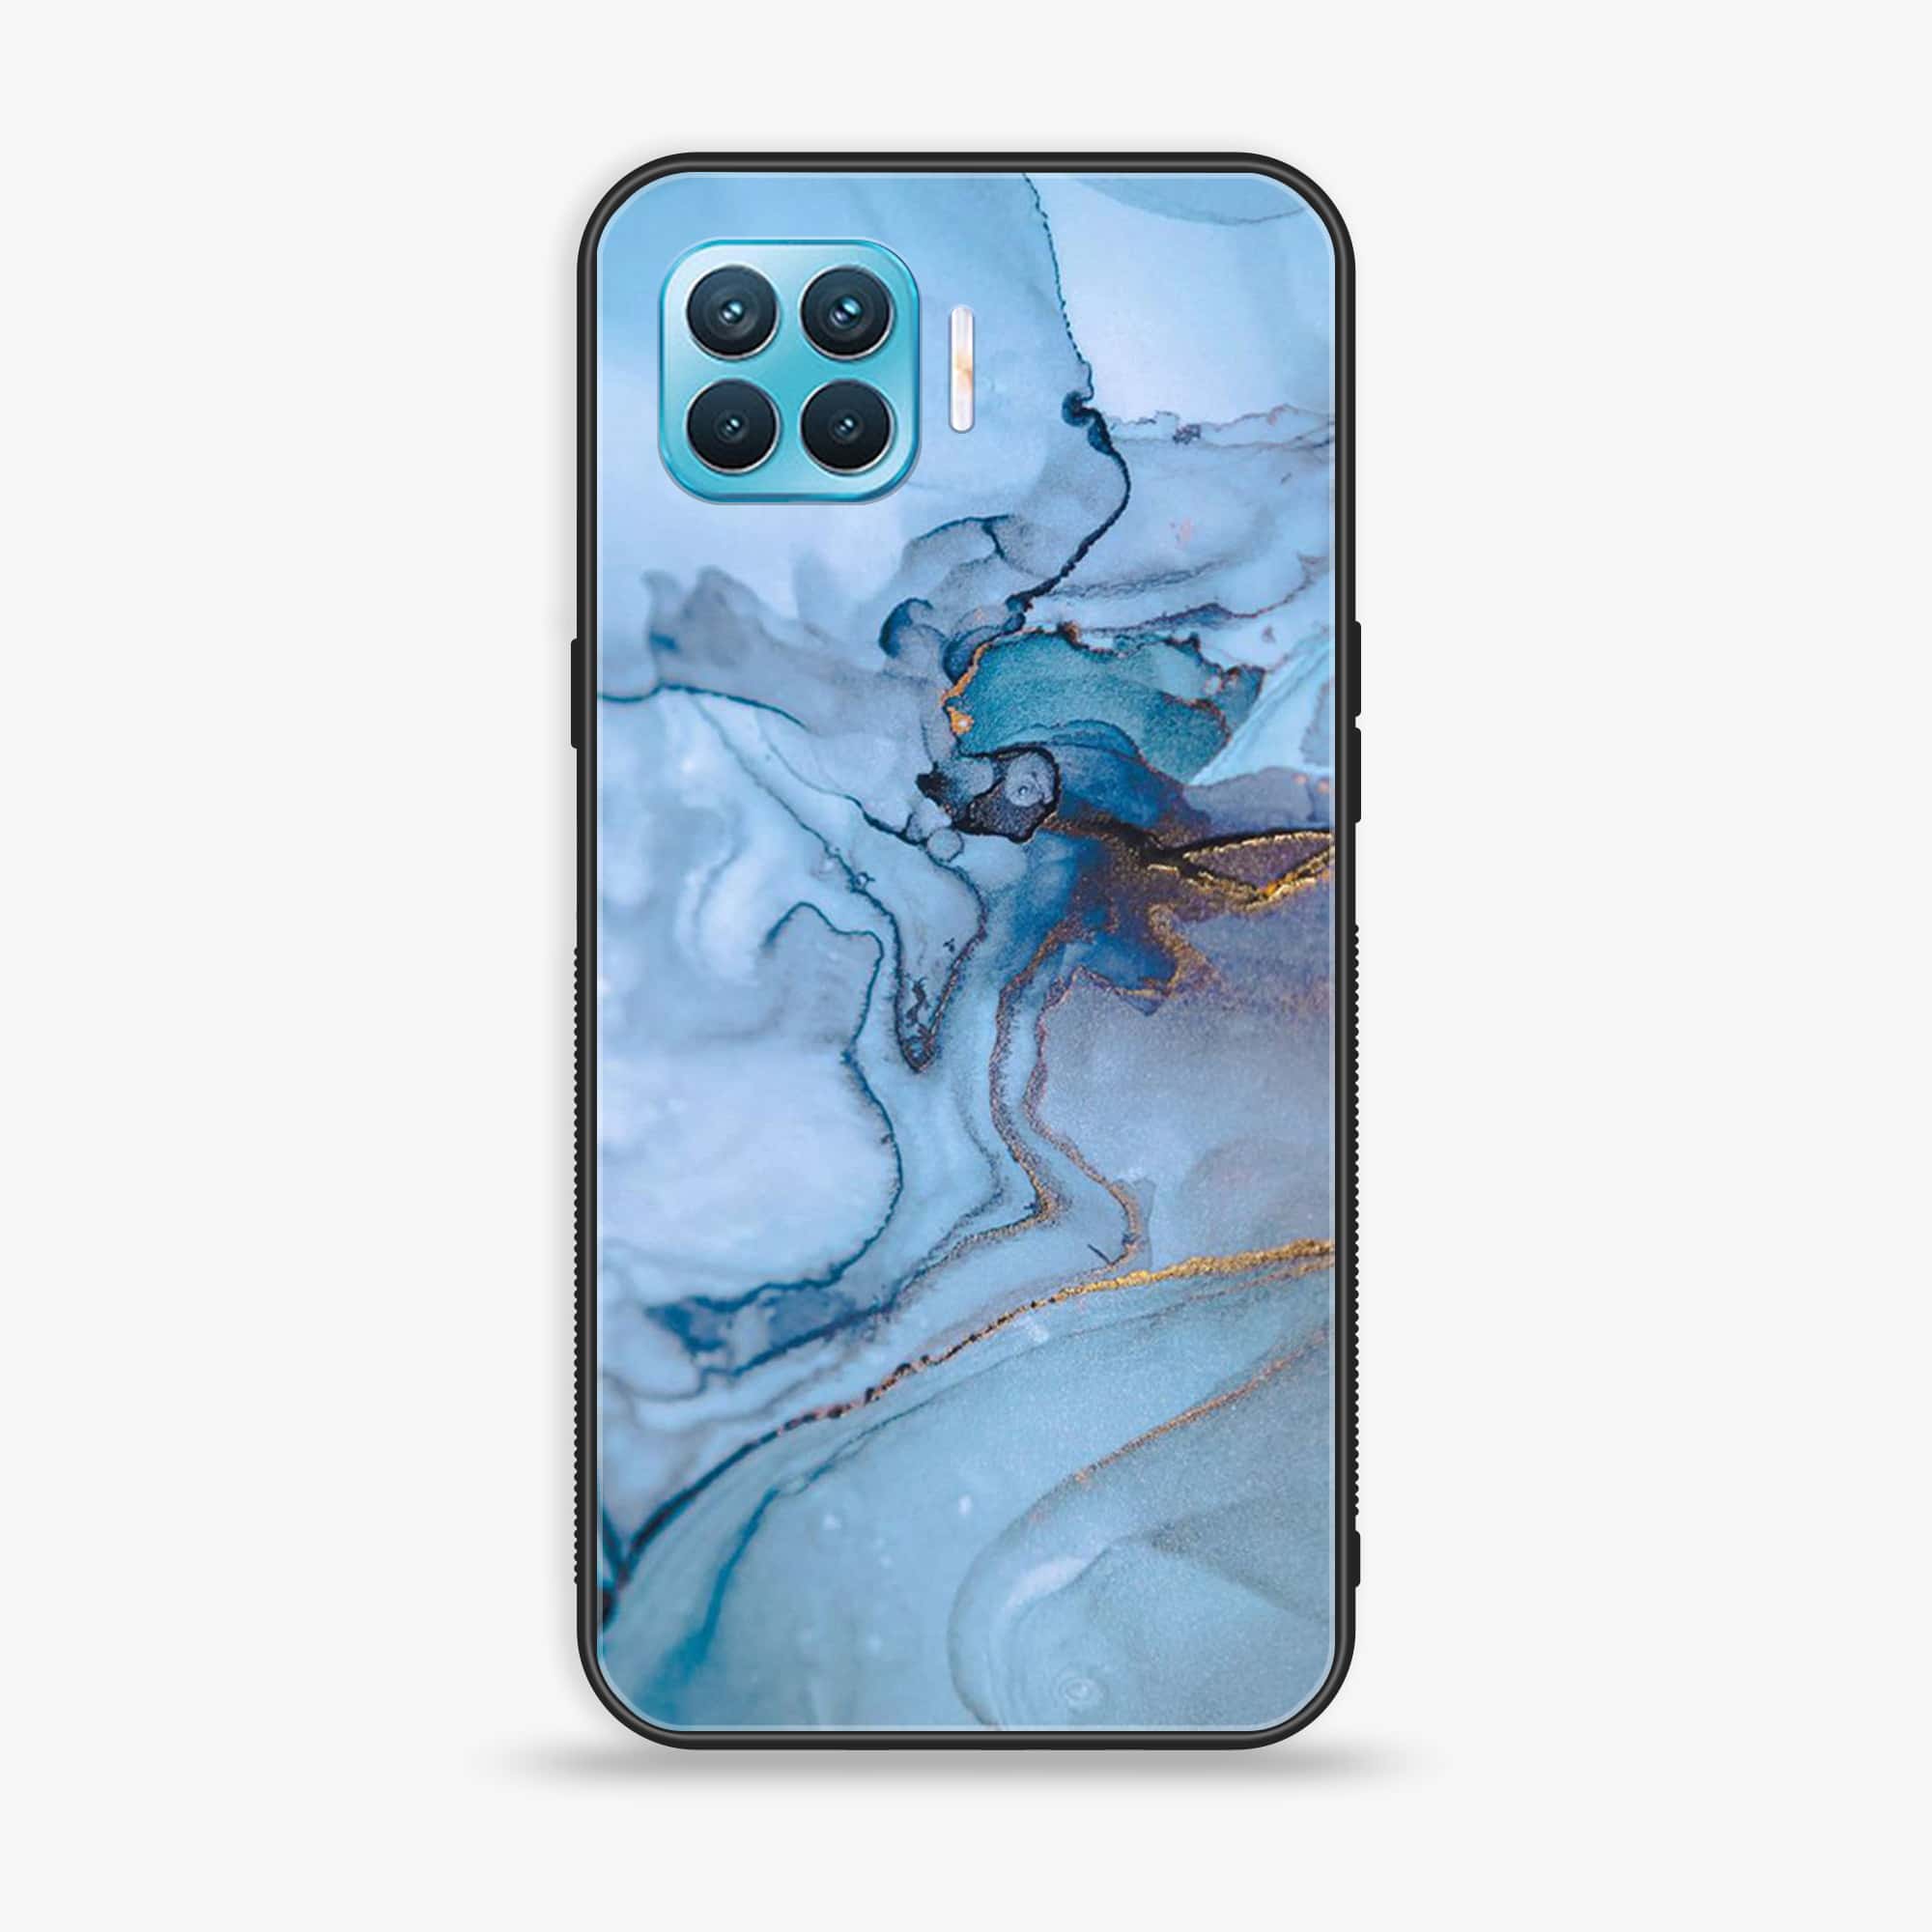 Oppo F17 Pro - Blue Marble Series - Premium Printed Glass soft Bumper shock Proof Case